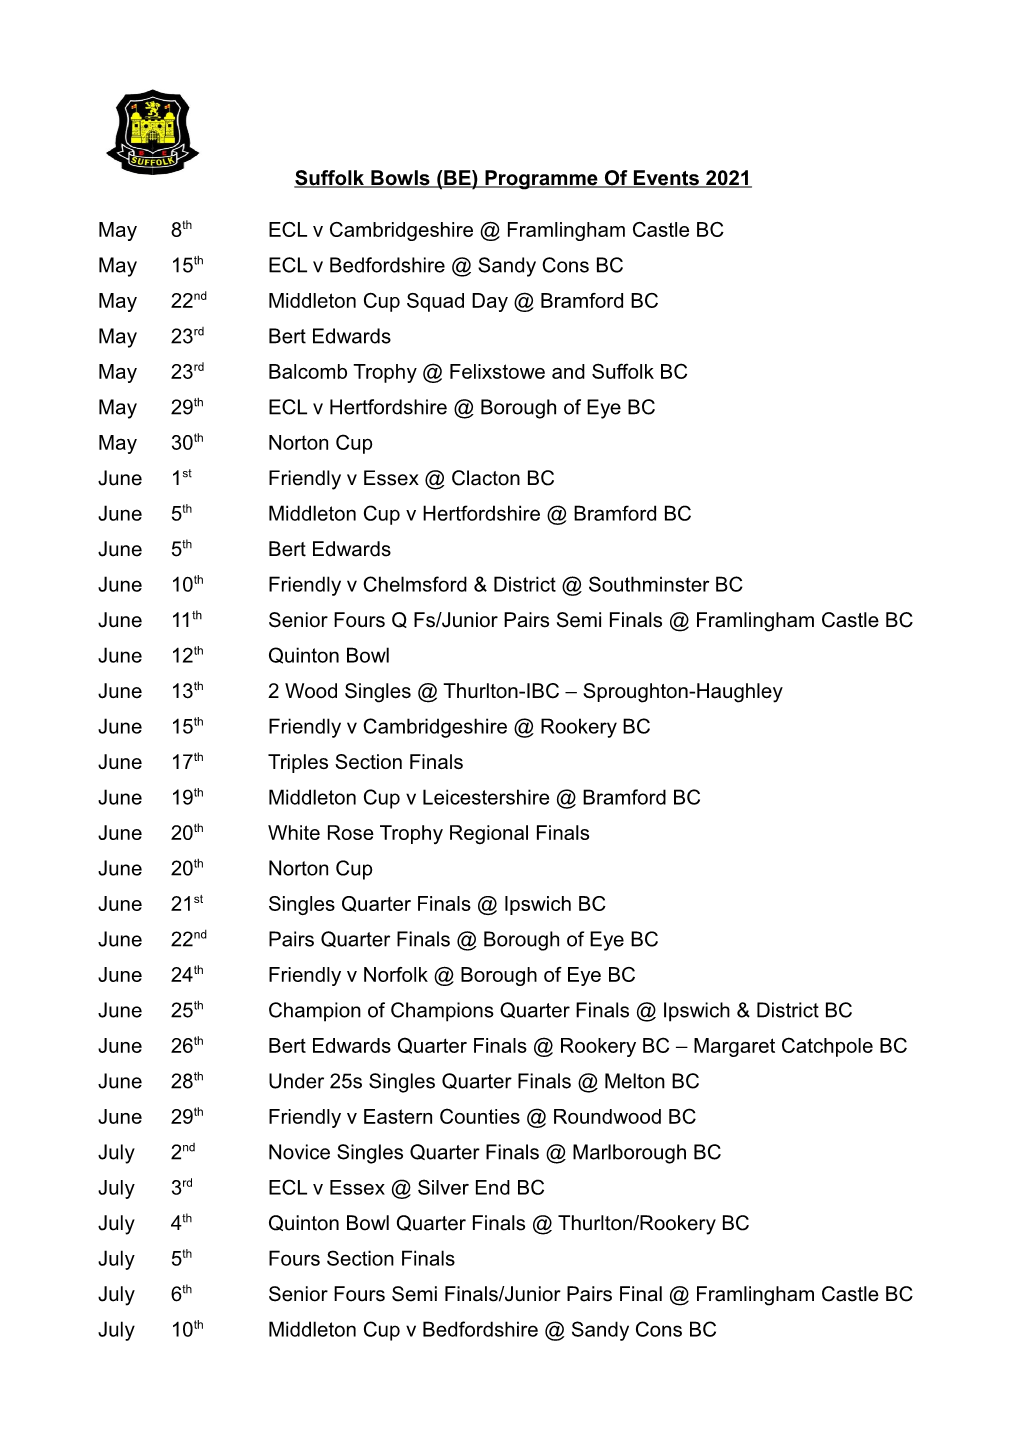 Suffolk Bowls (BE) Programme of Events 2021 May ECL V